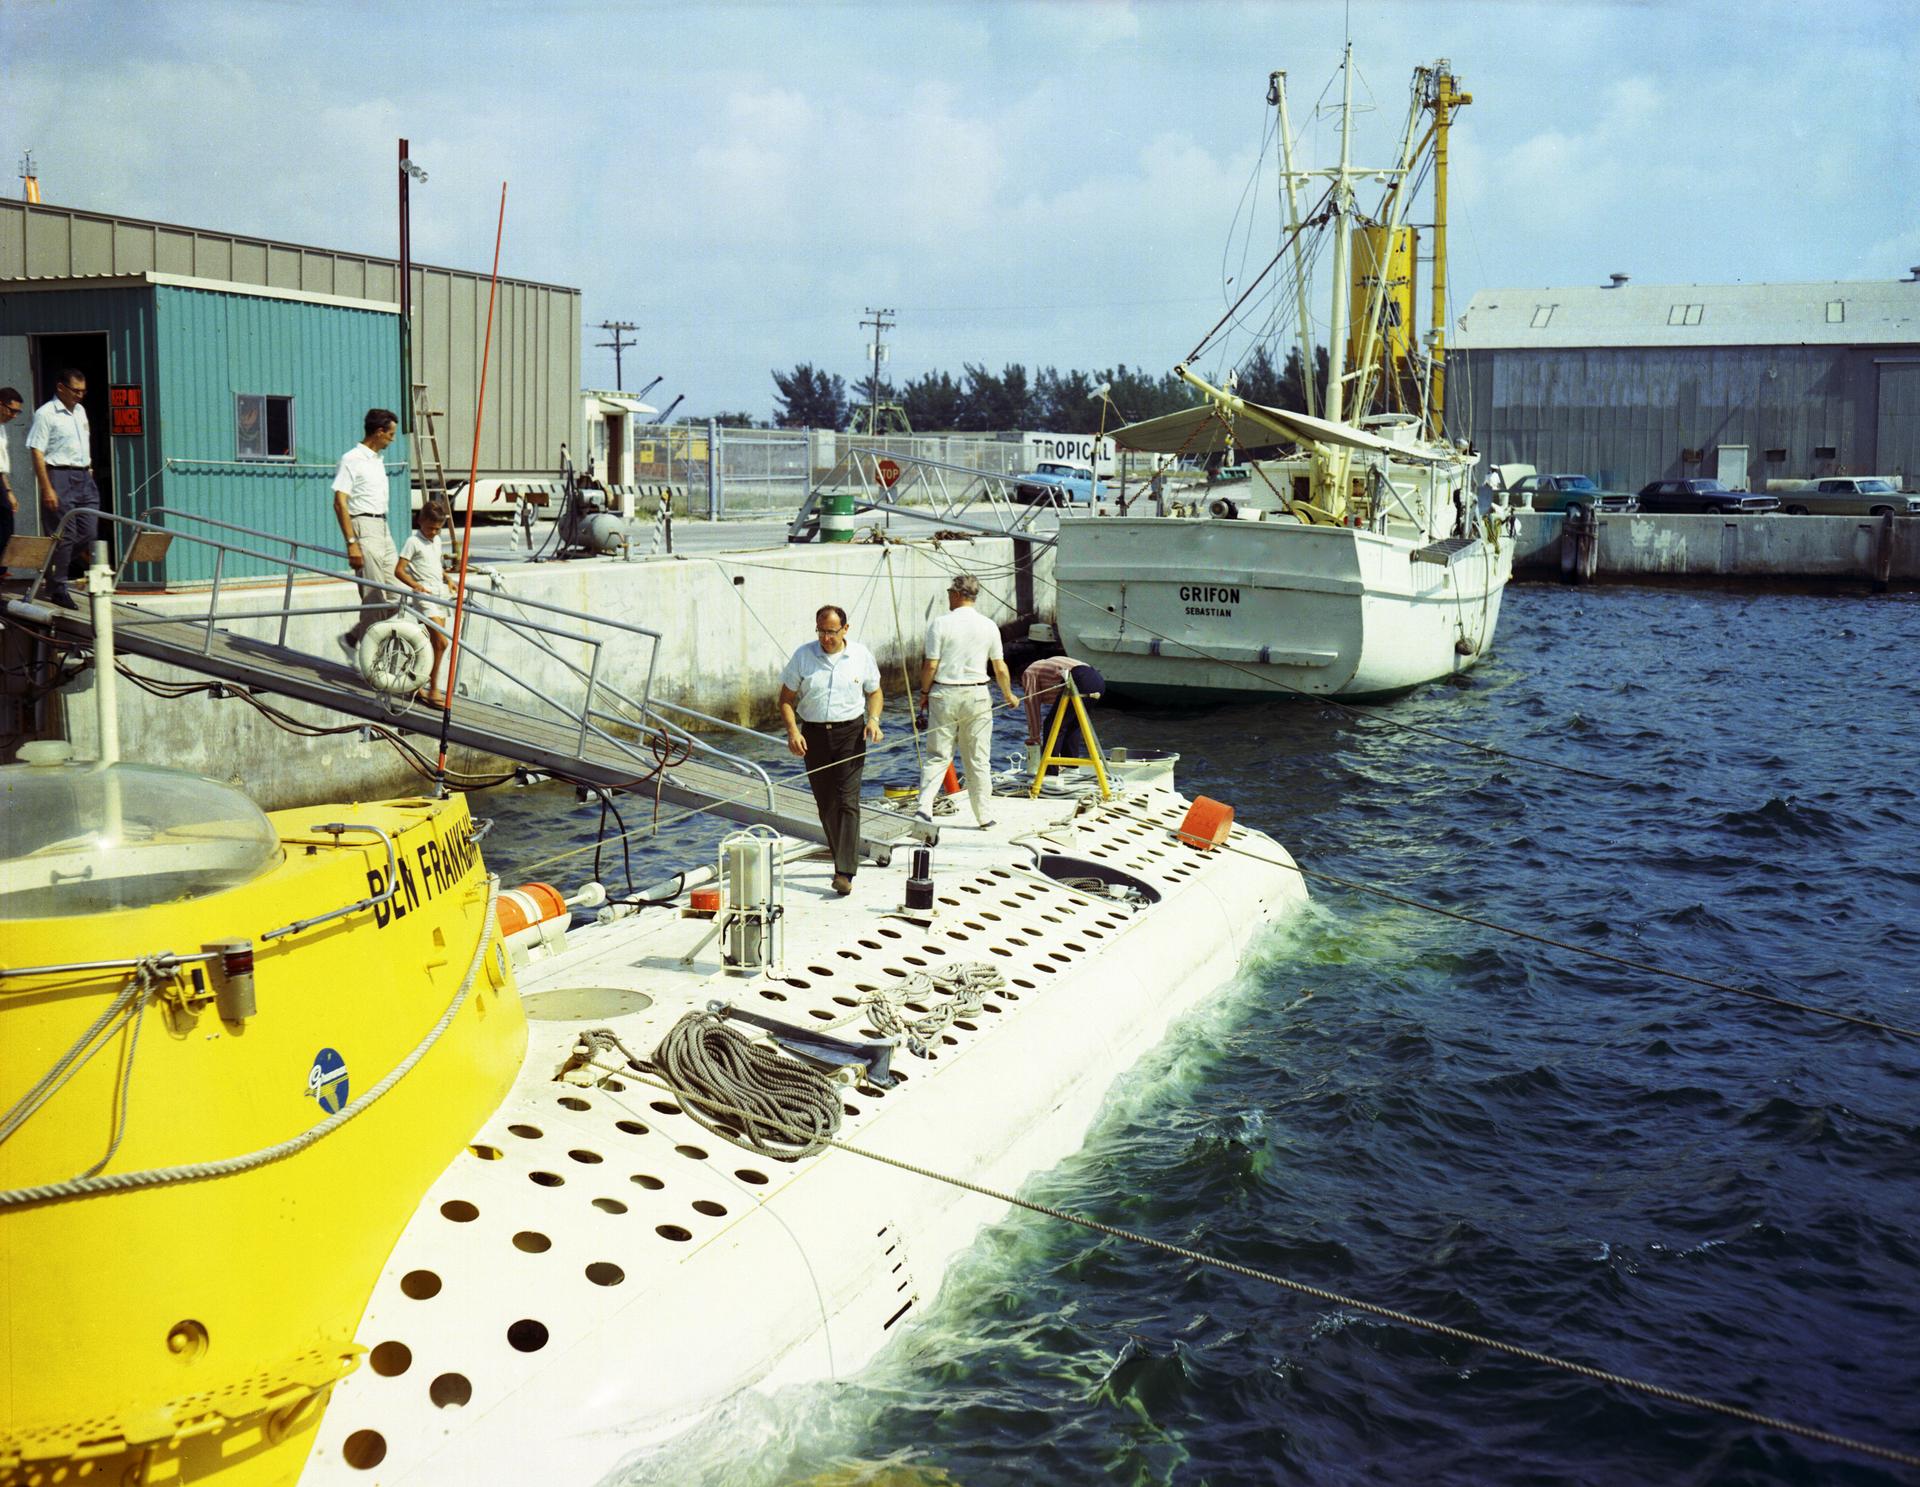 NASA officials survey the deep-sea research submarine Ben Franklin while docked in July 1969. 